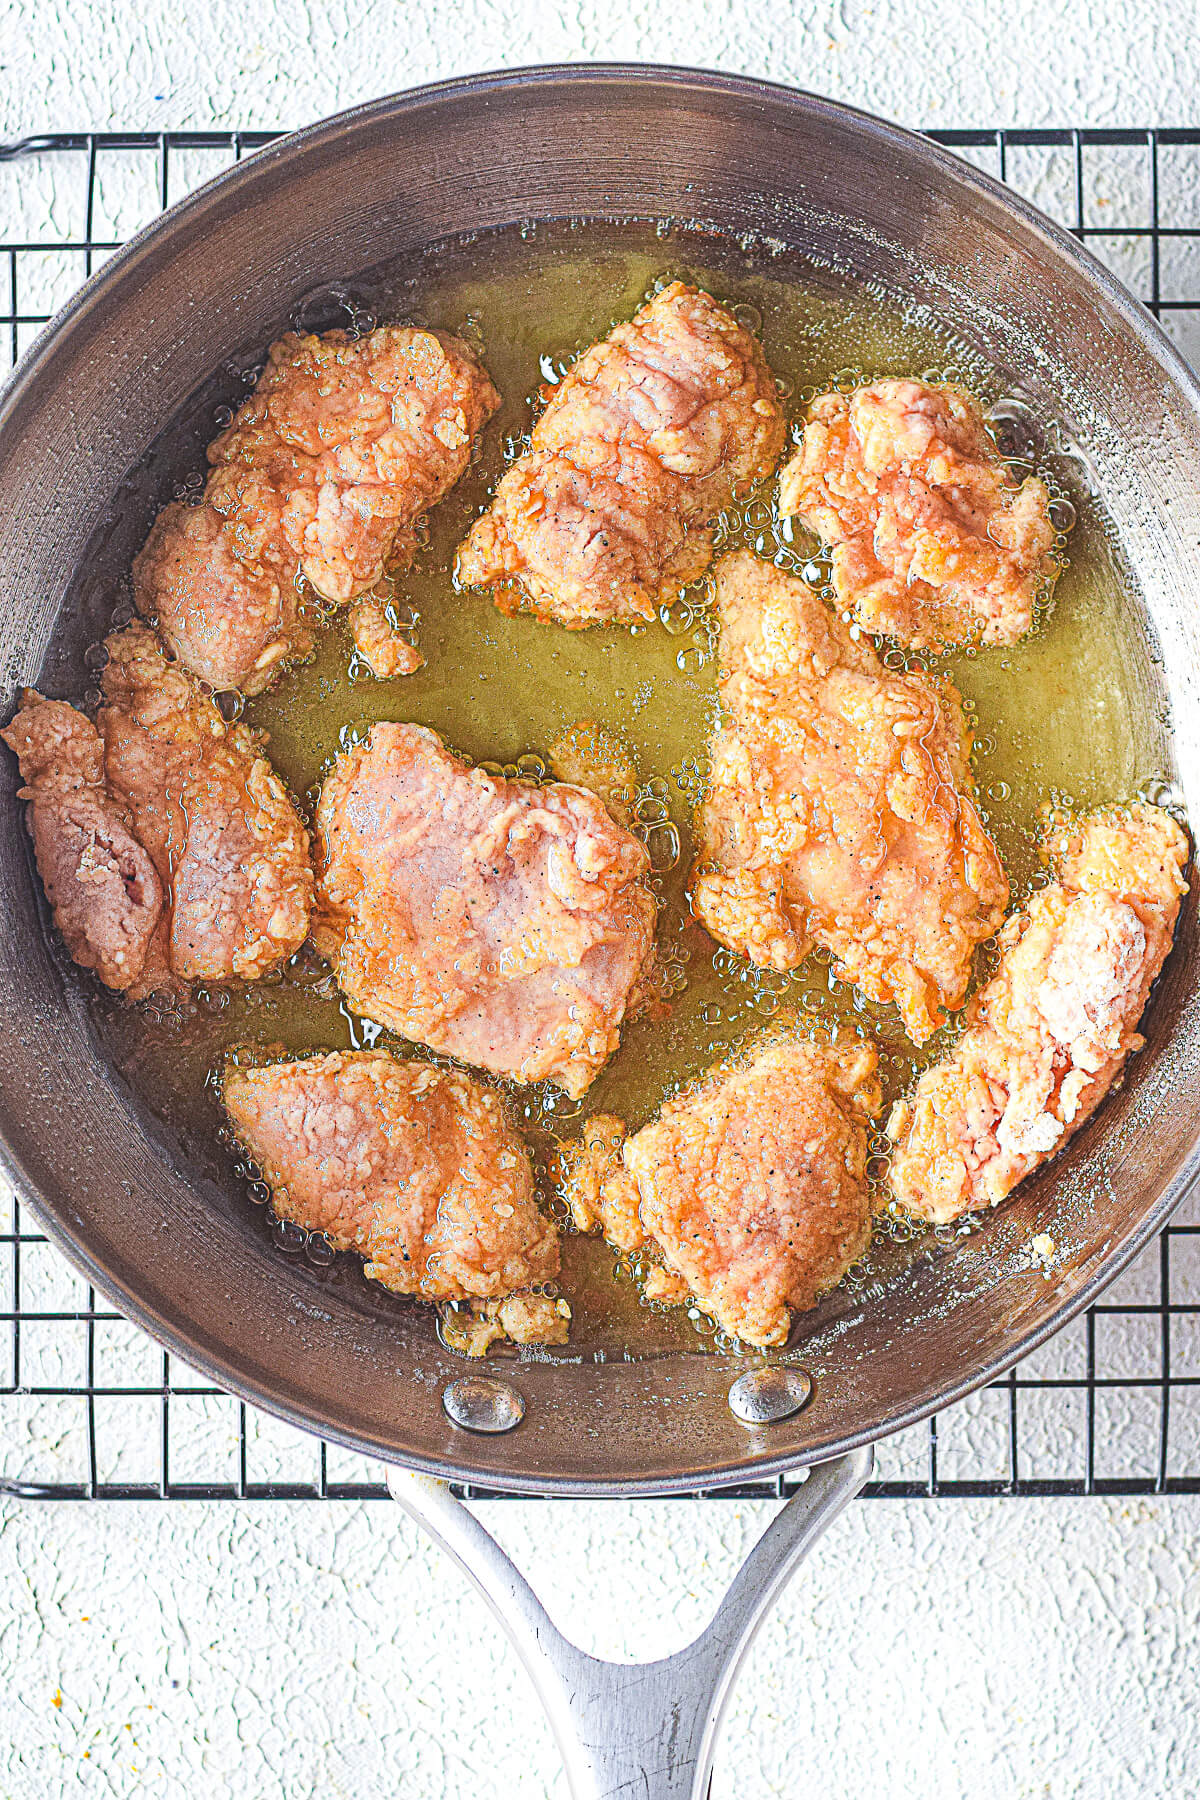 A frying pan filled with oil and frying chicken.